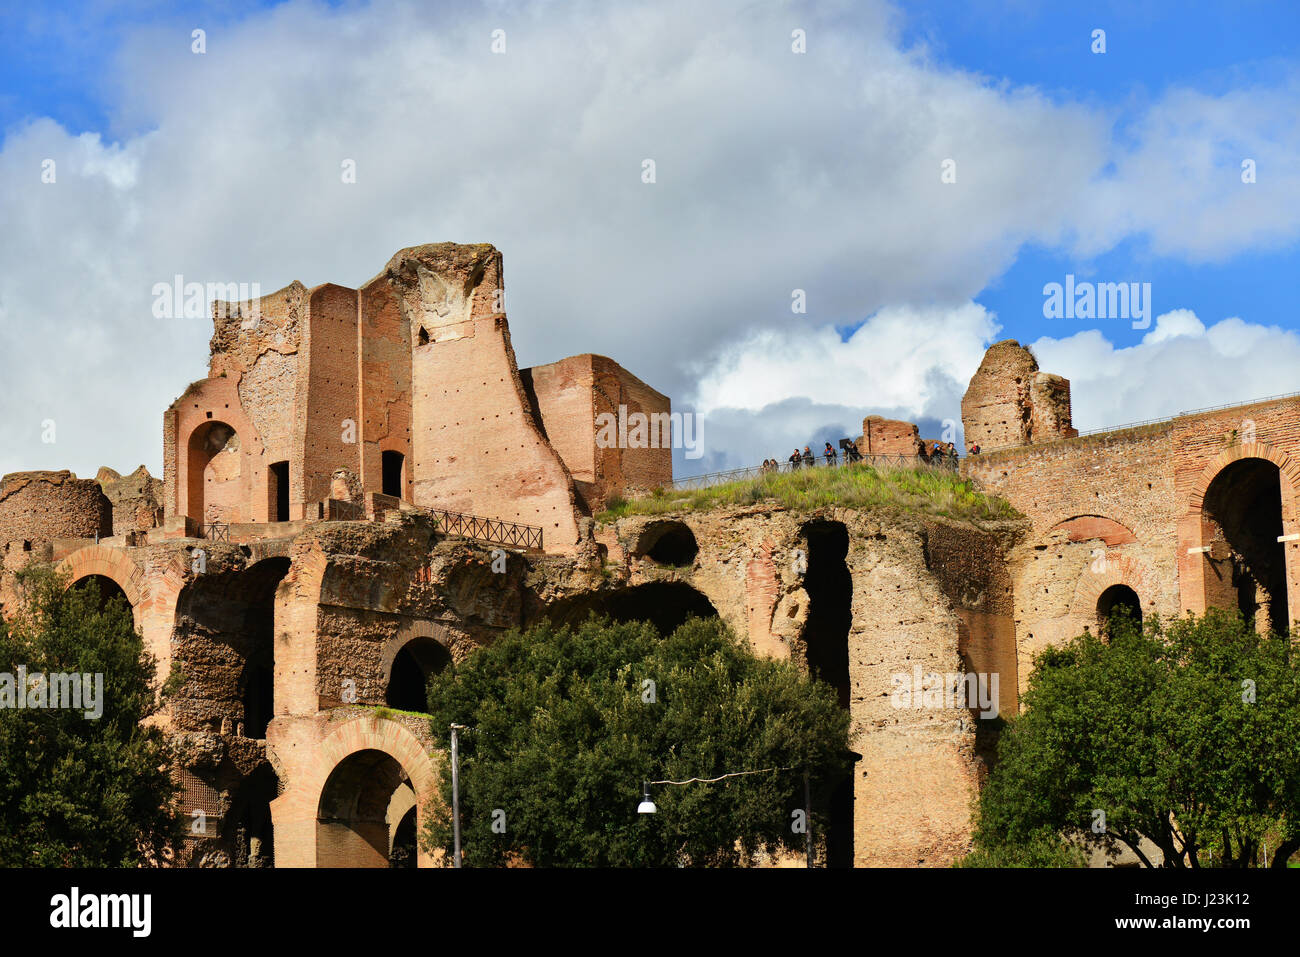 Tourists visit Palatine Hill Imperial Palace ruins in Rome Stock Photo